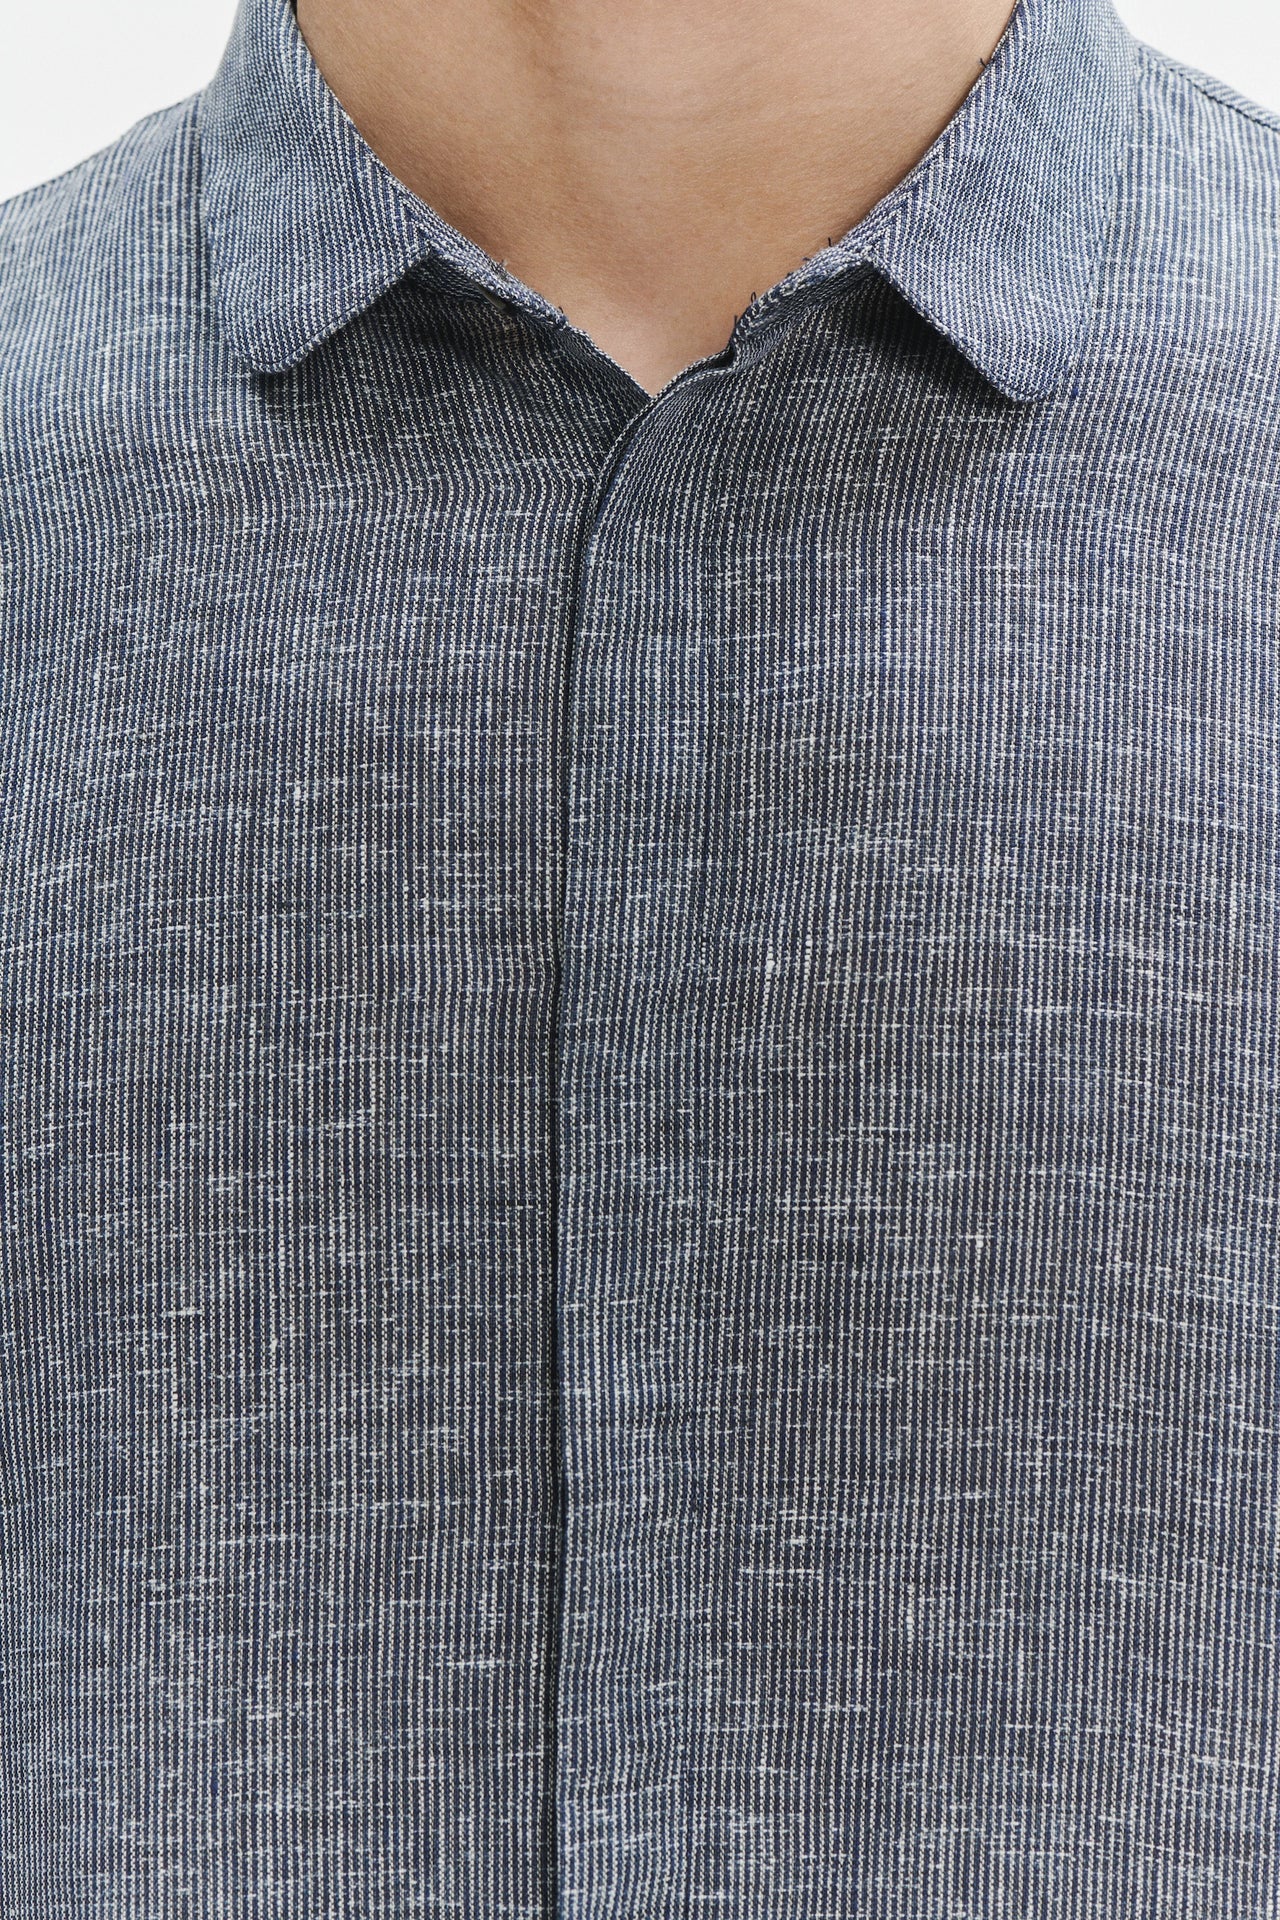 Cute Round Collar Shirt in a Soft and Airy Pin Stripe Italian Linen